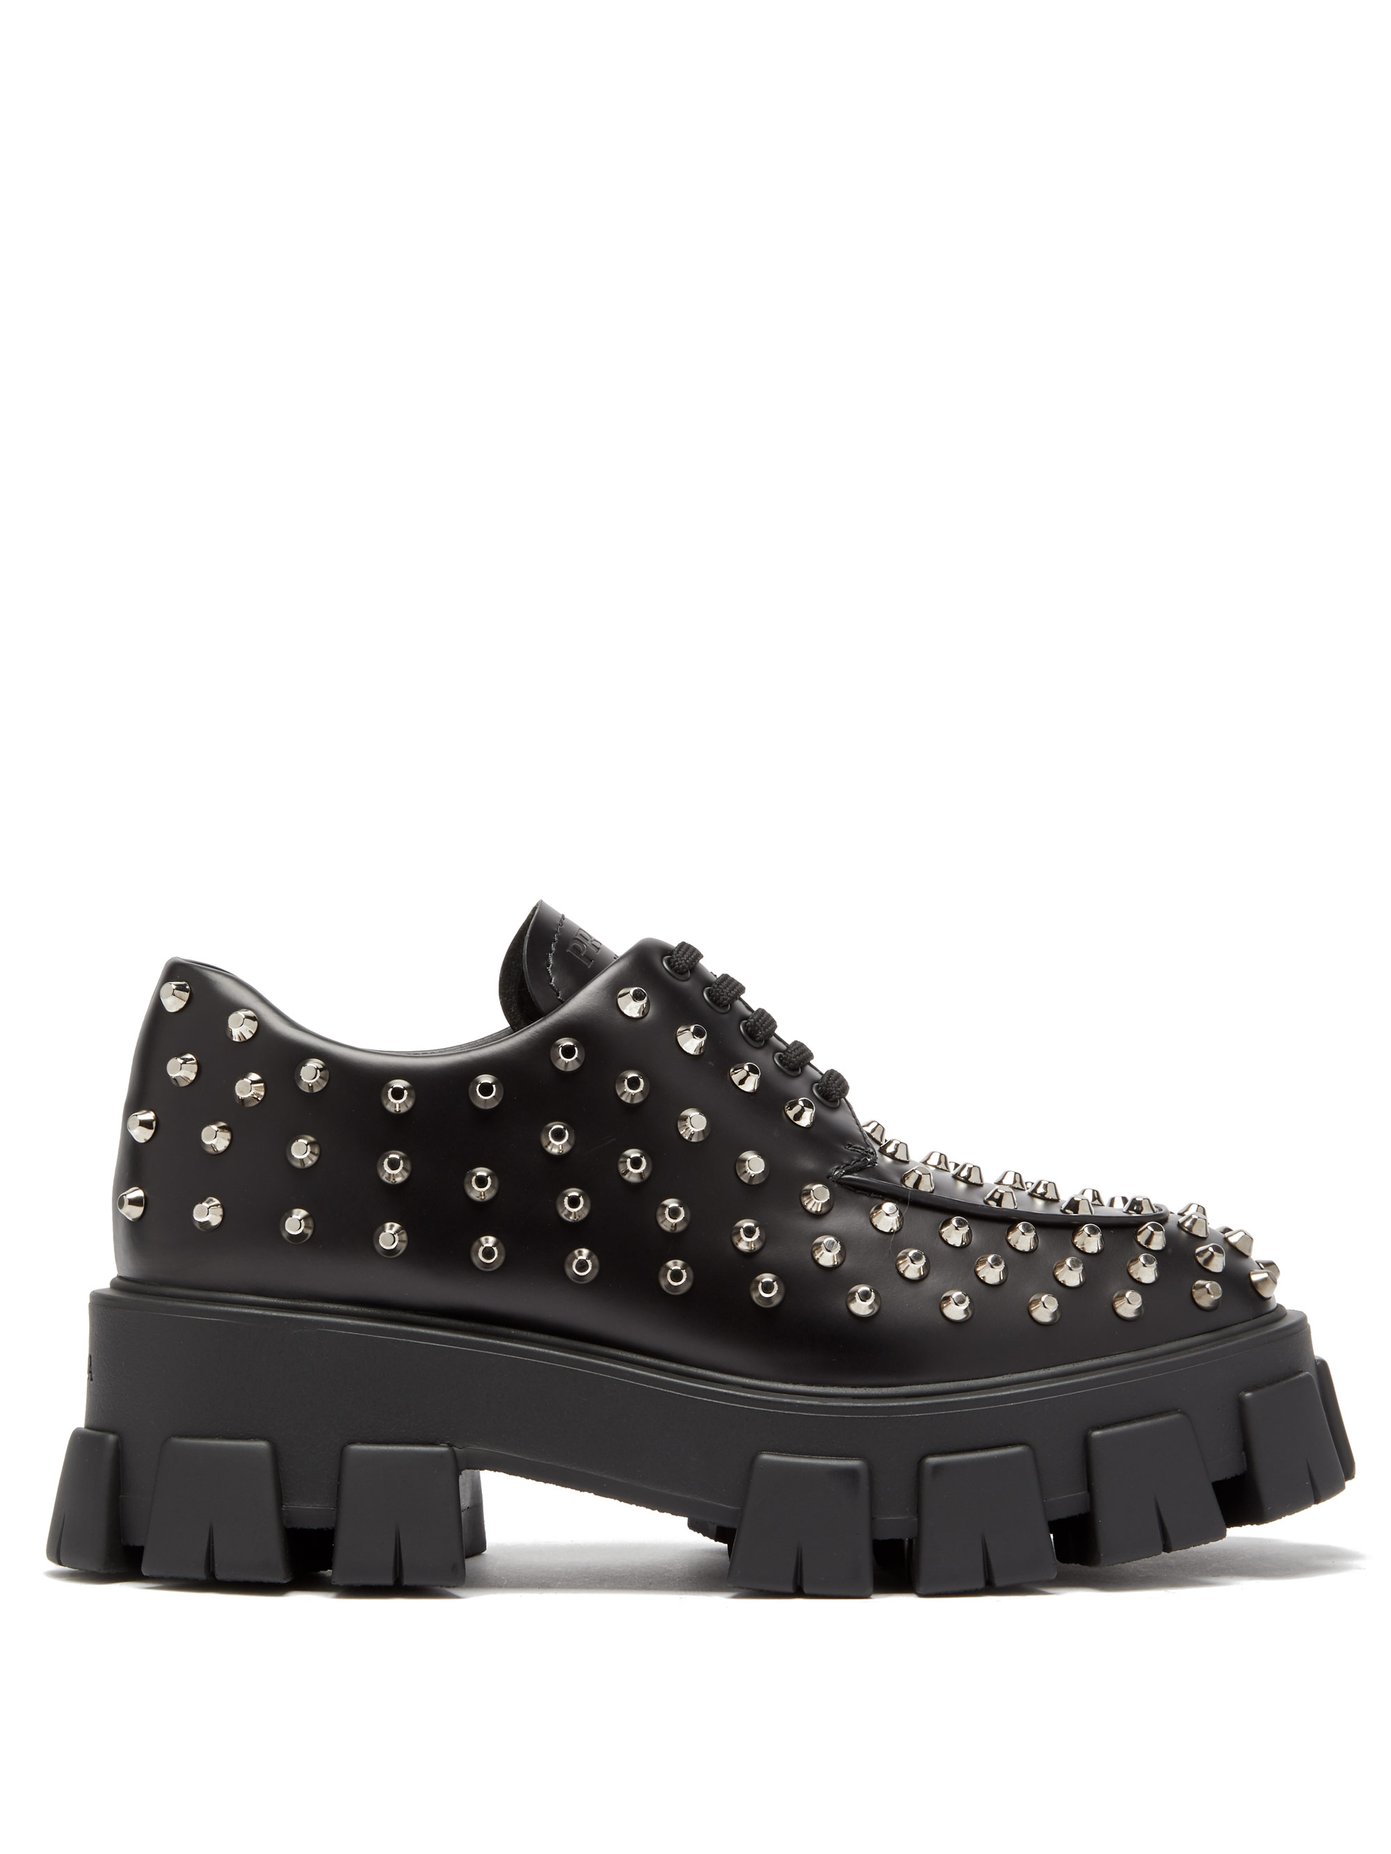 Studded leather derby shoes | Prada 